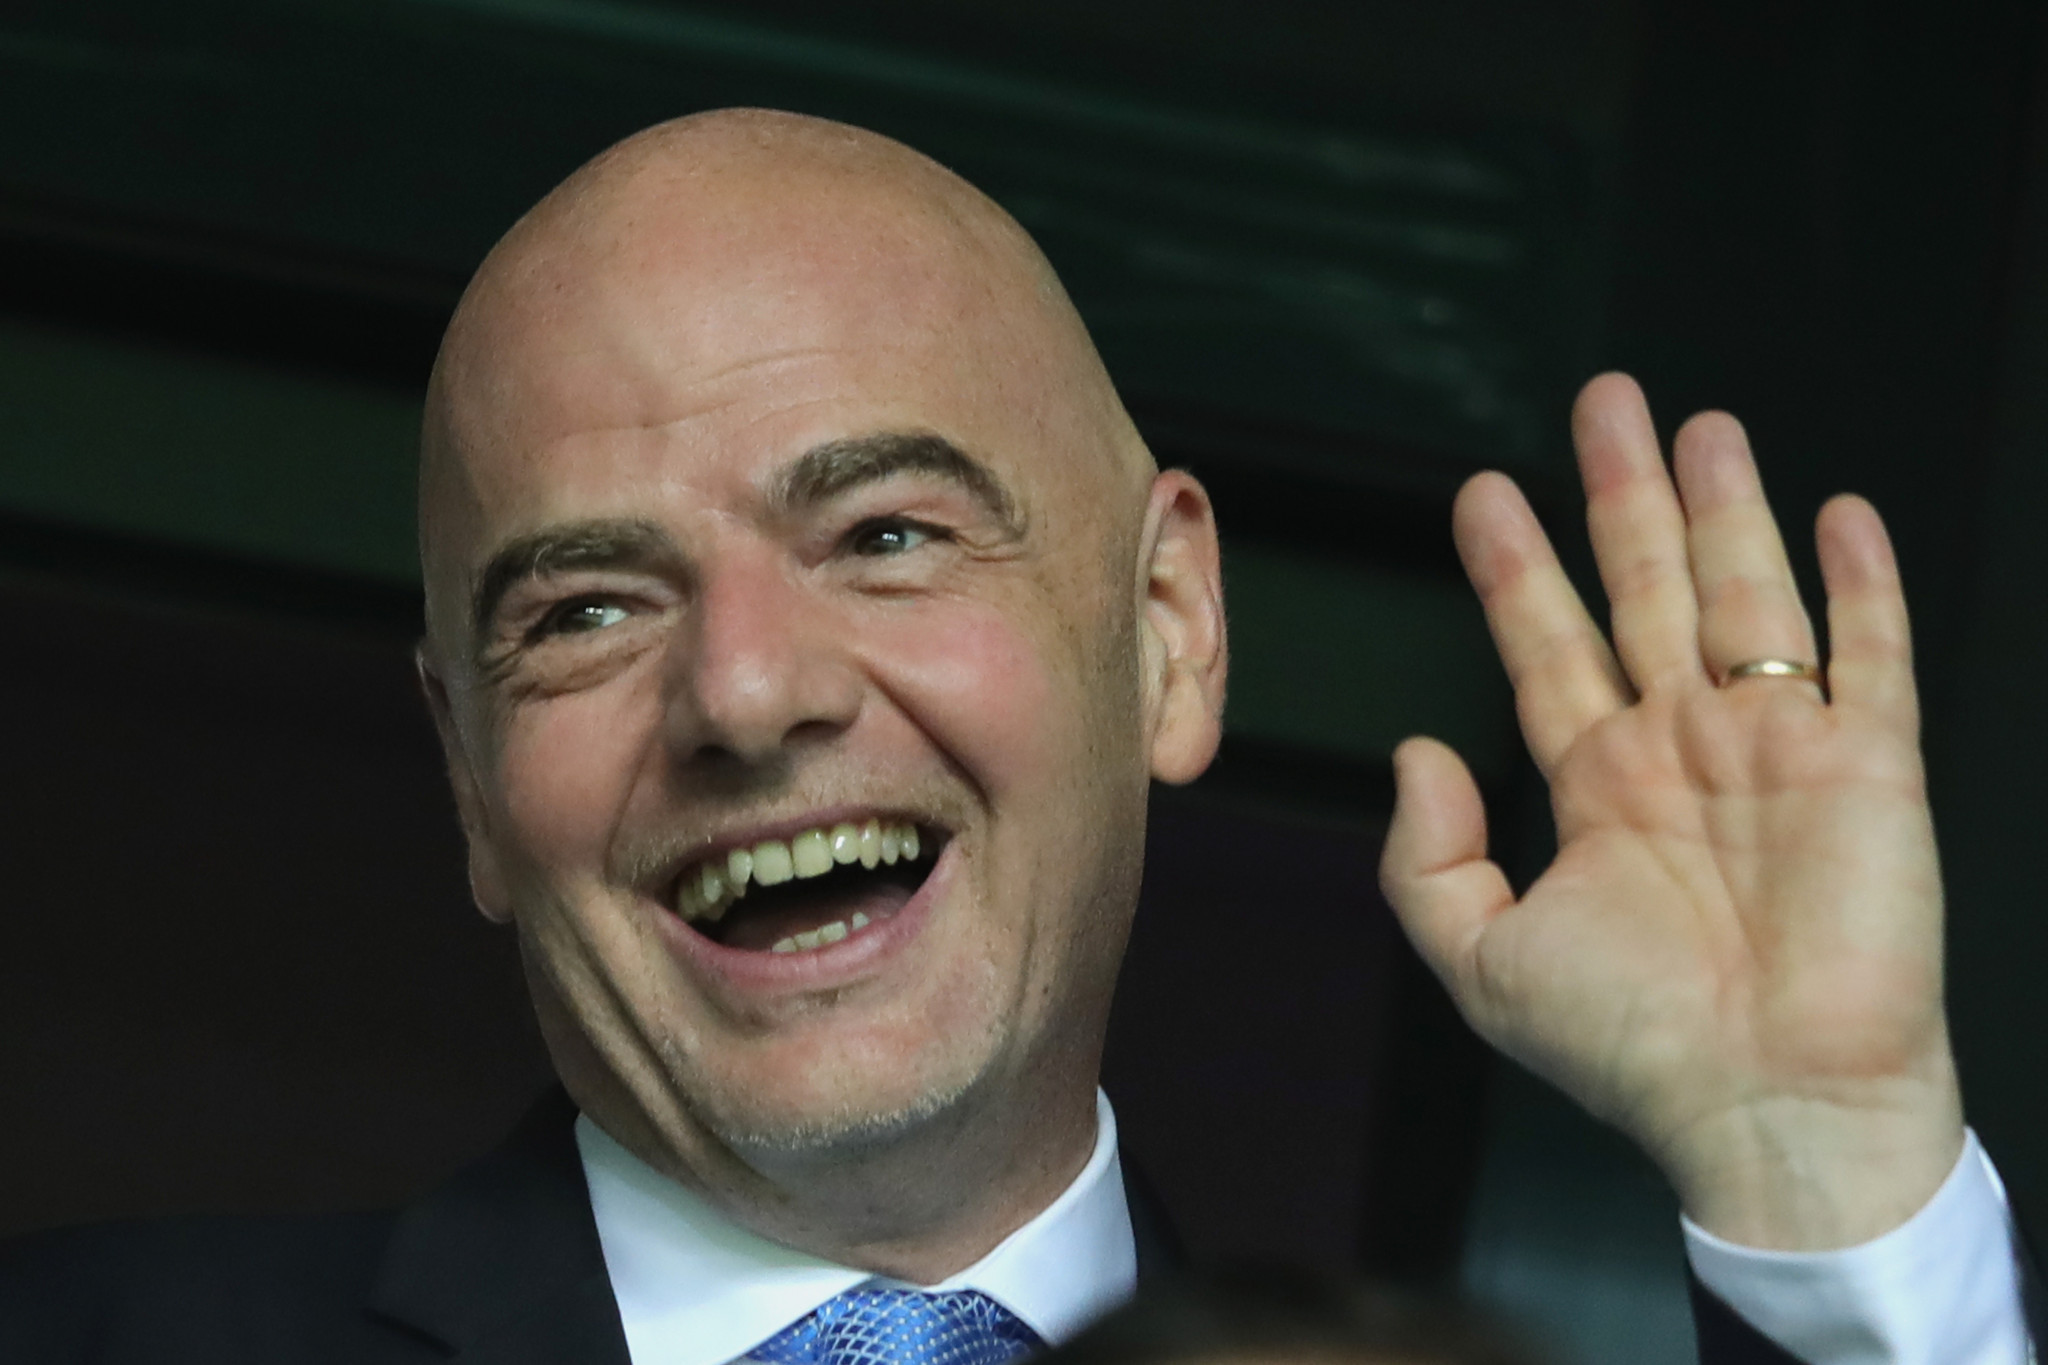 Deal struck in Ghanaian football crisis after FIFA President Infantino holds meeting